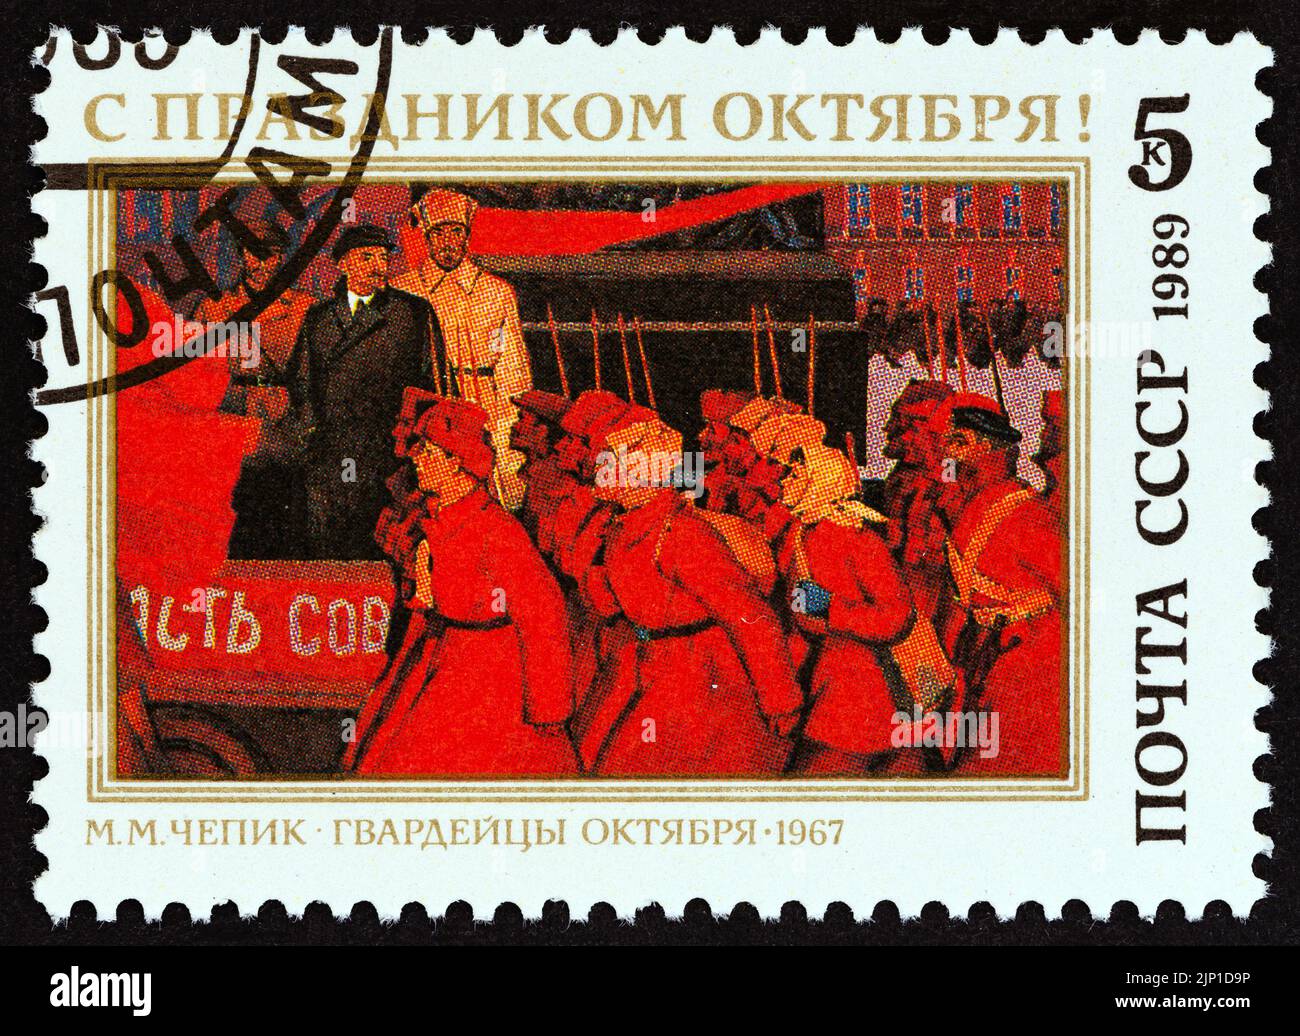 USSR - CIRCA 1989: A stamp printed in USSR issued for the 72th Anniversary of Great October Revolution shows October Guardsmen by M. M. Chepik, 1967. Stock Photo